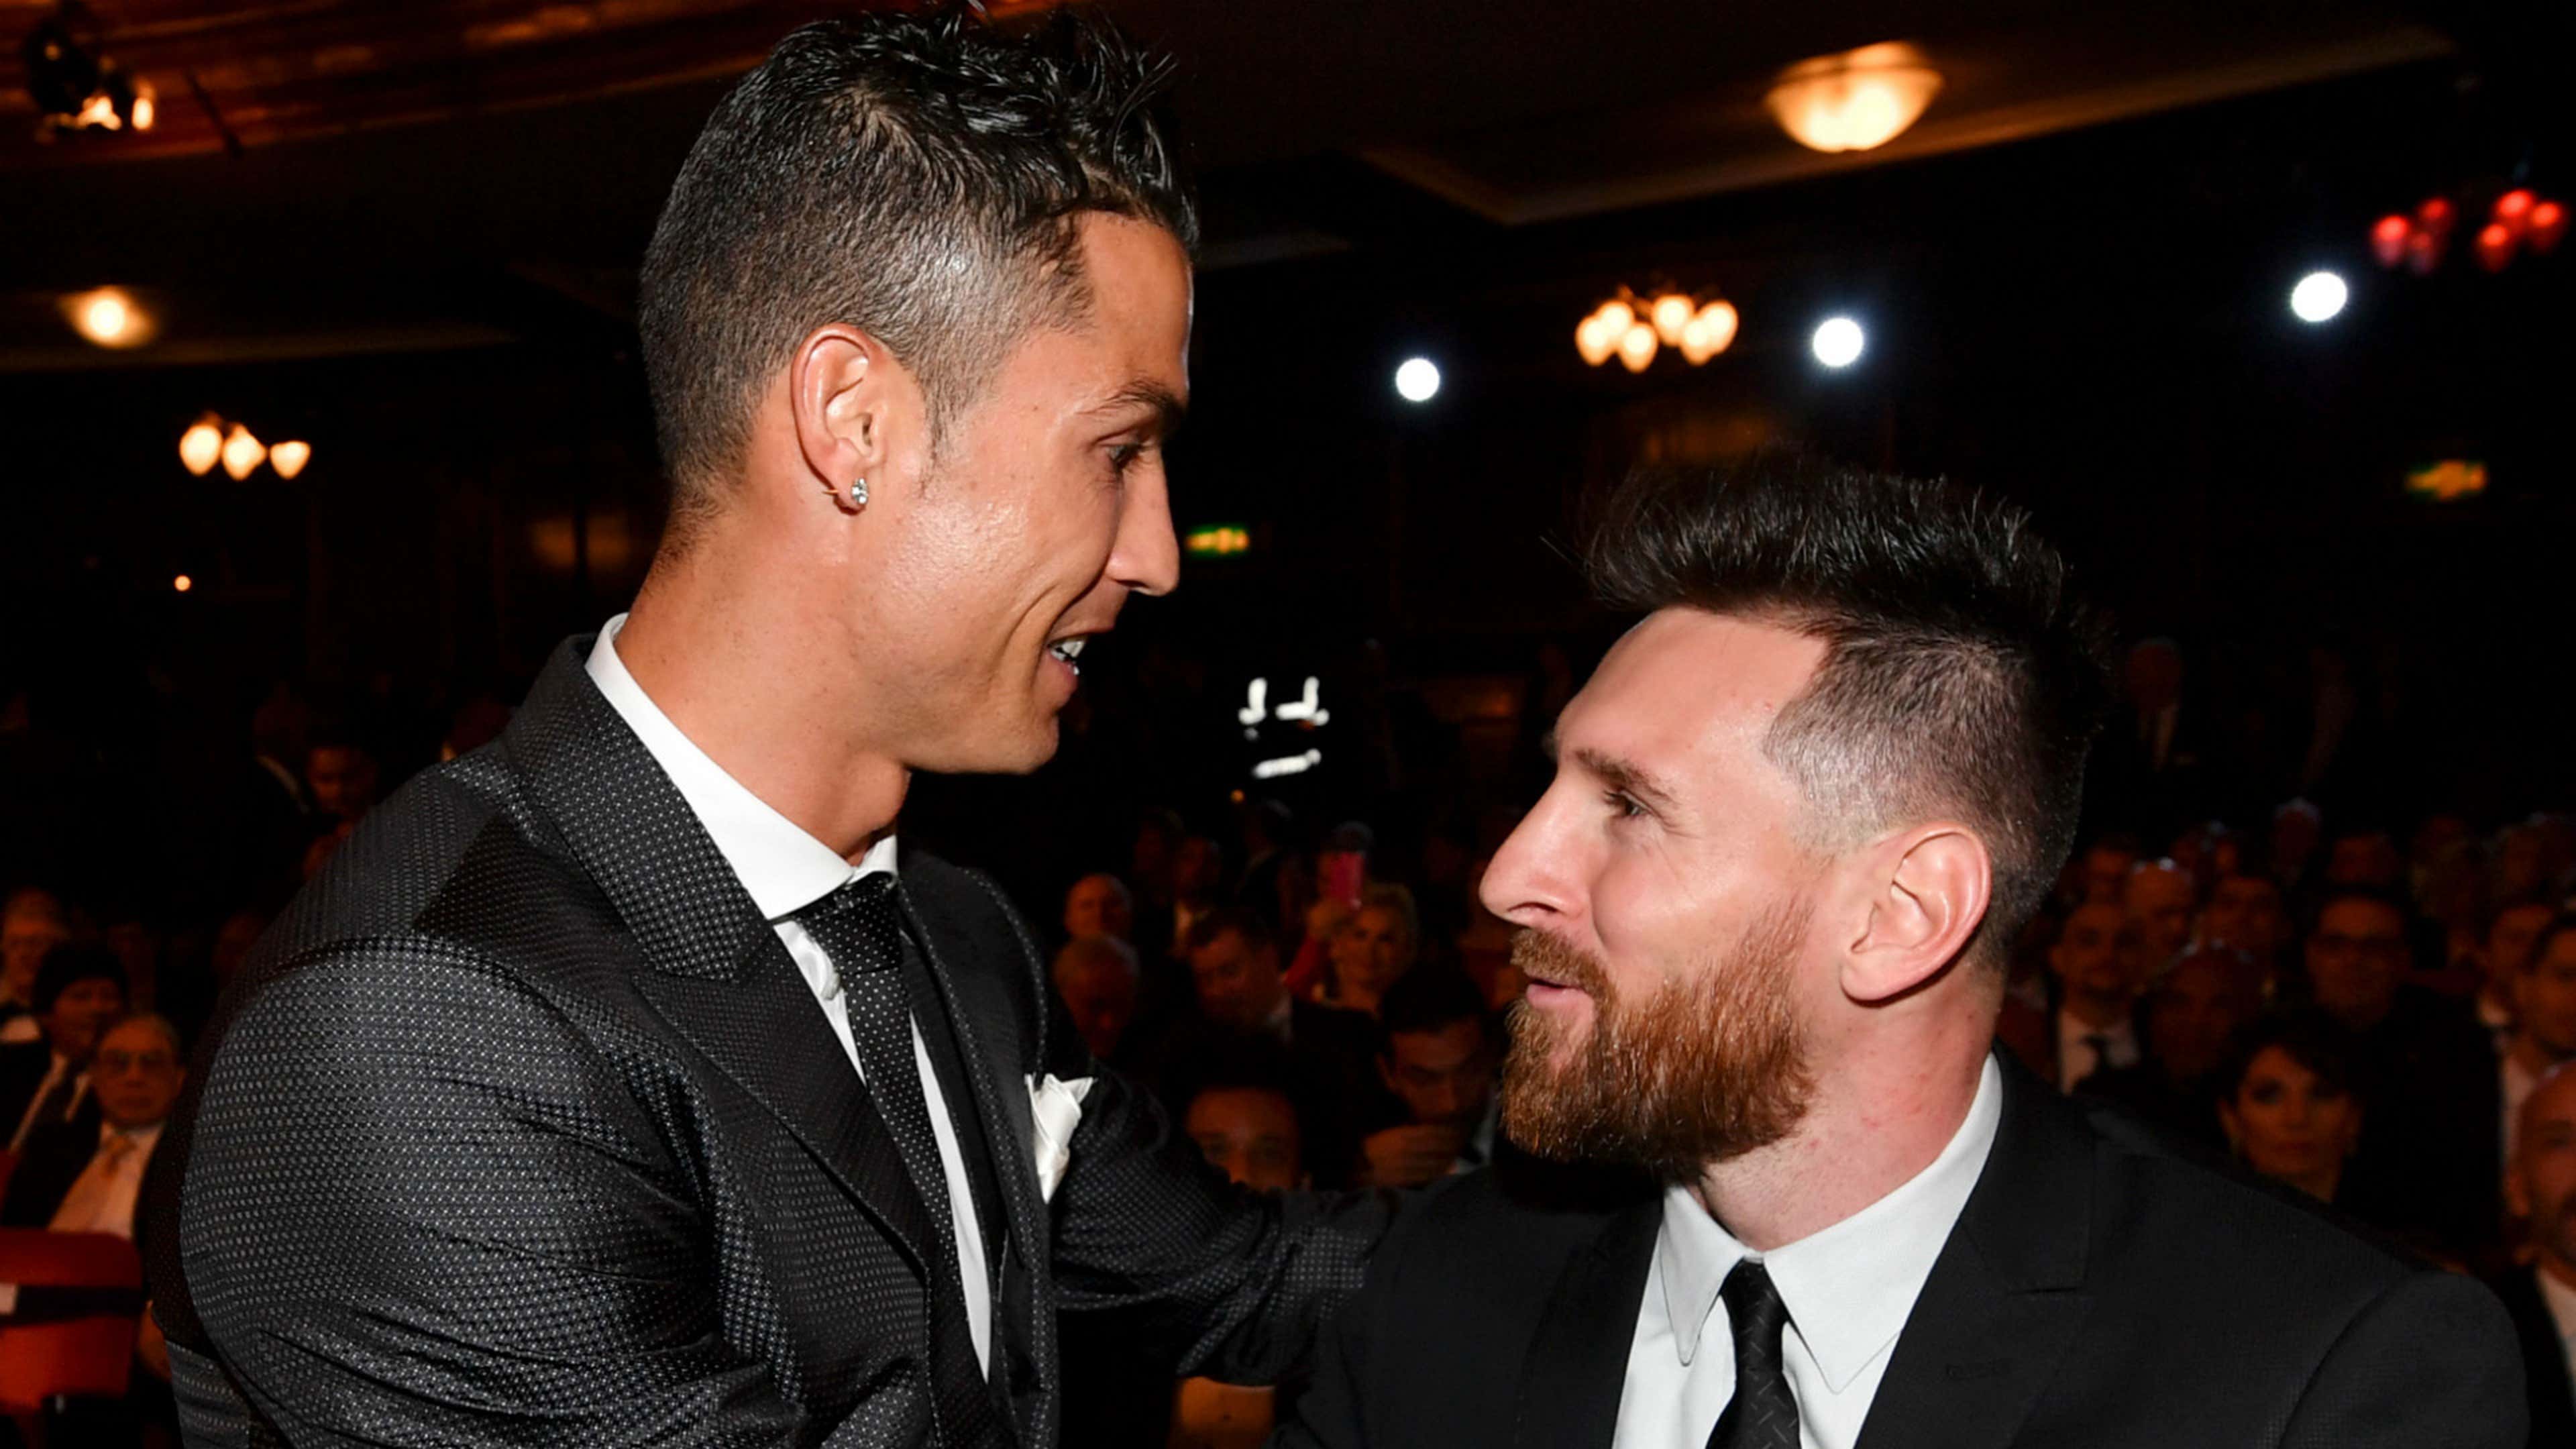 CR7 and Messi friends